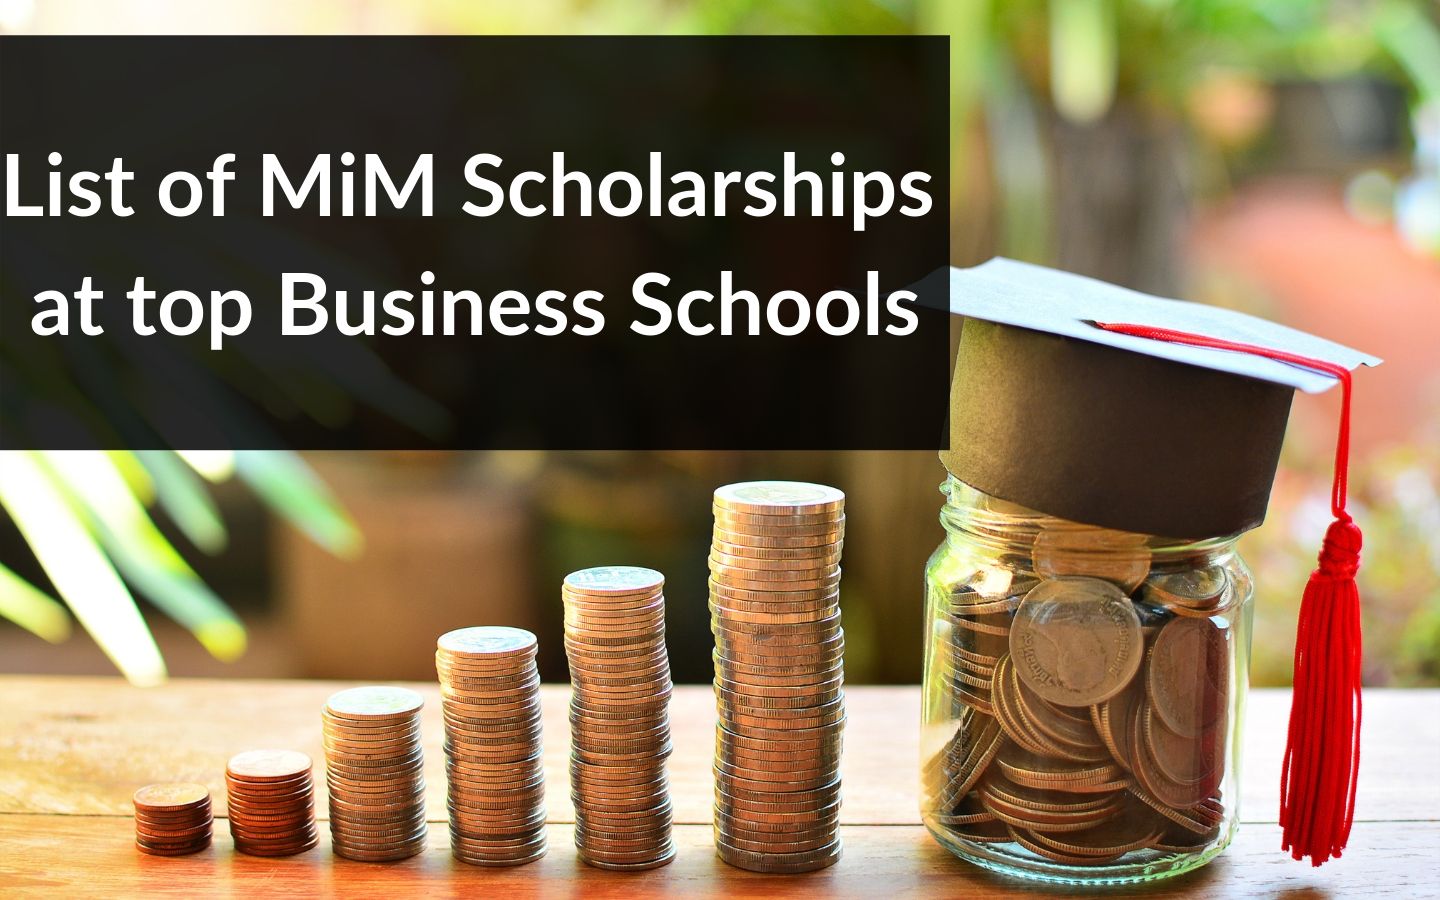 List of Masters in Management Scholarships – MiM Scholarships at Top Business Schools